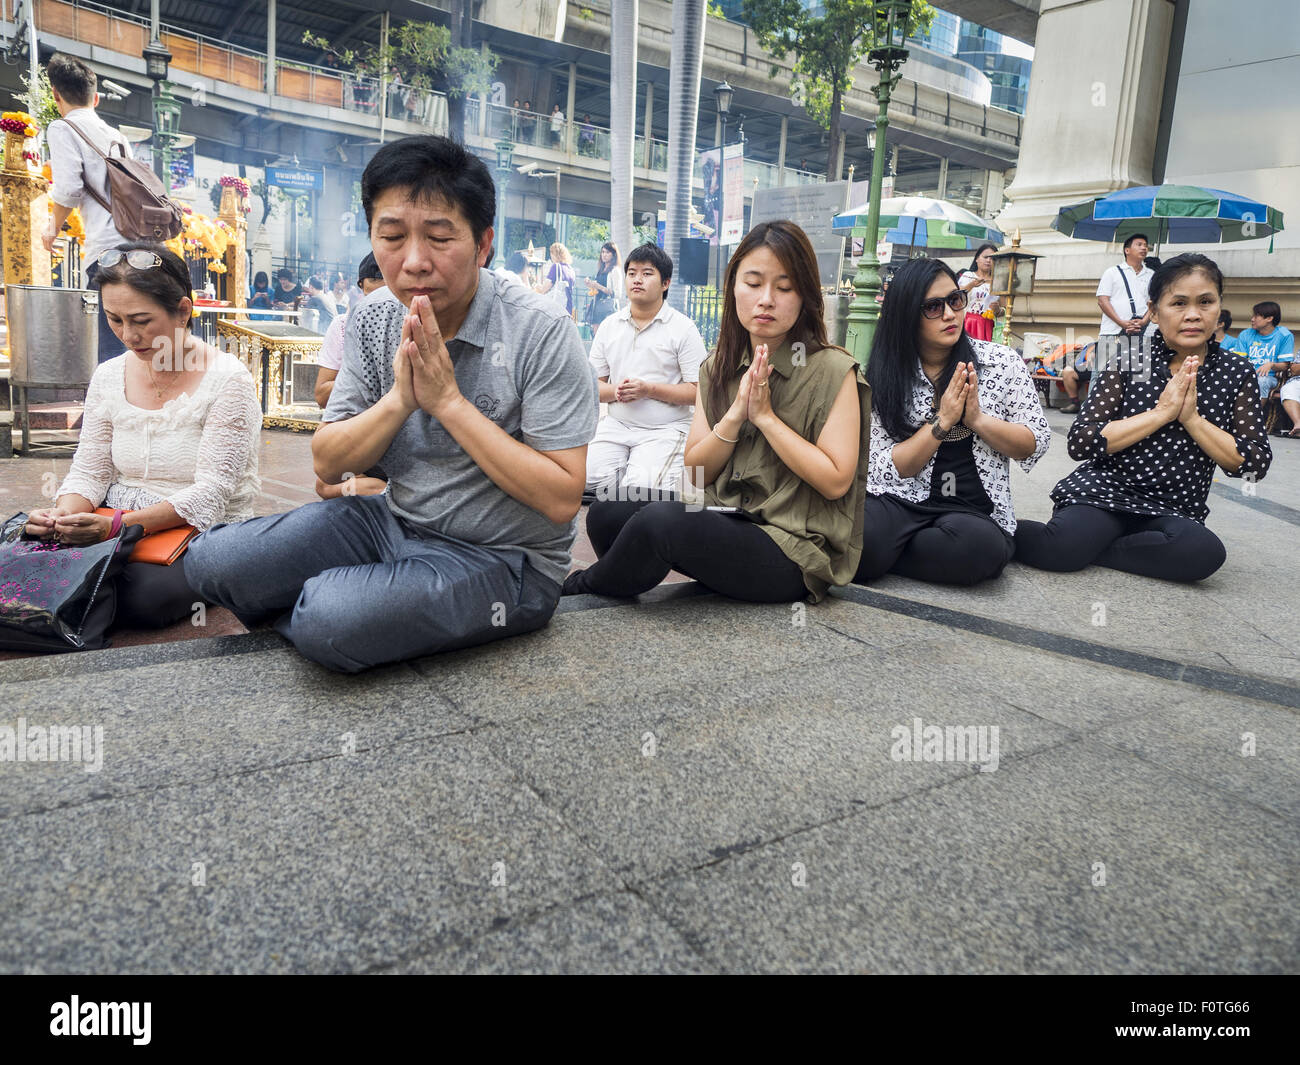 Bangkok, Thailand. 21st Aug, 2015. People gather on the plaza at Erawan Shrine for a Mahayana Buddhist ceremony to restore the shrine after the bombing. The Bangkok Metropolitan Administration (BMA) held a religious ceremony Friday for the Ratchaprasong bomb victims. The ceremony started with a Brahmin blessing at Erawan Shrine, which was the target of a bombing Monday night. After the blessing people went across the street to the plaza in front of Central World mall for an interfaith religious service. Credit:  ZUMA Press, Inc./Alamy Live News Stock Photo